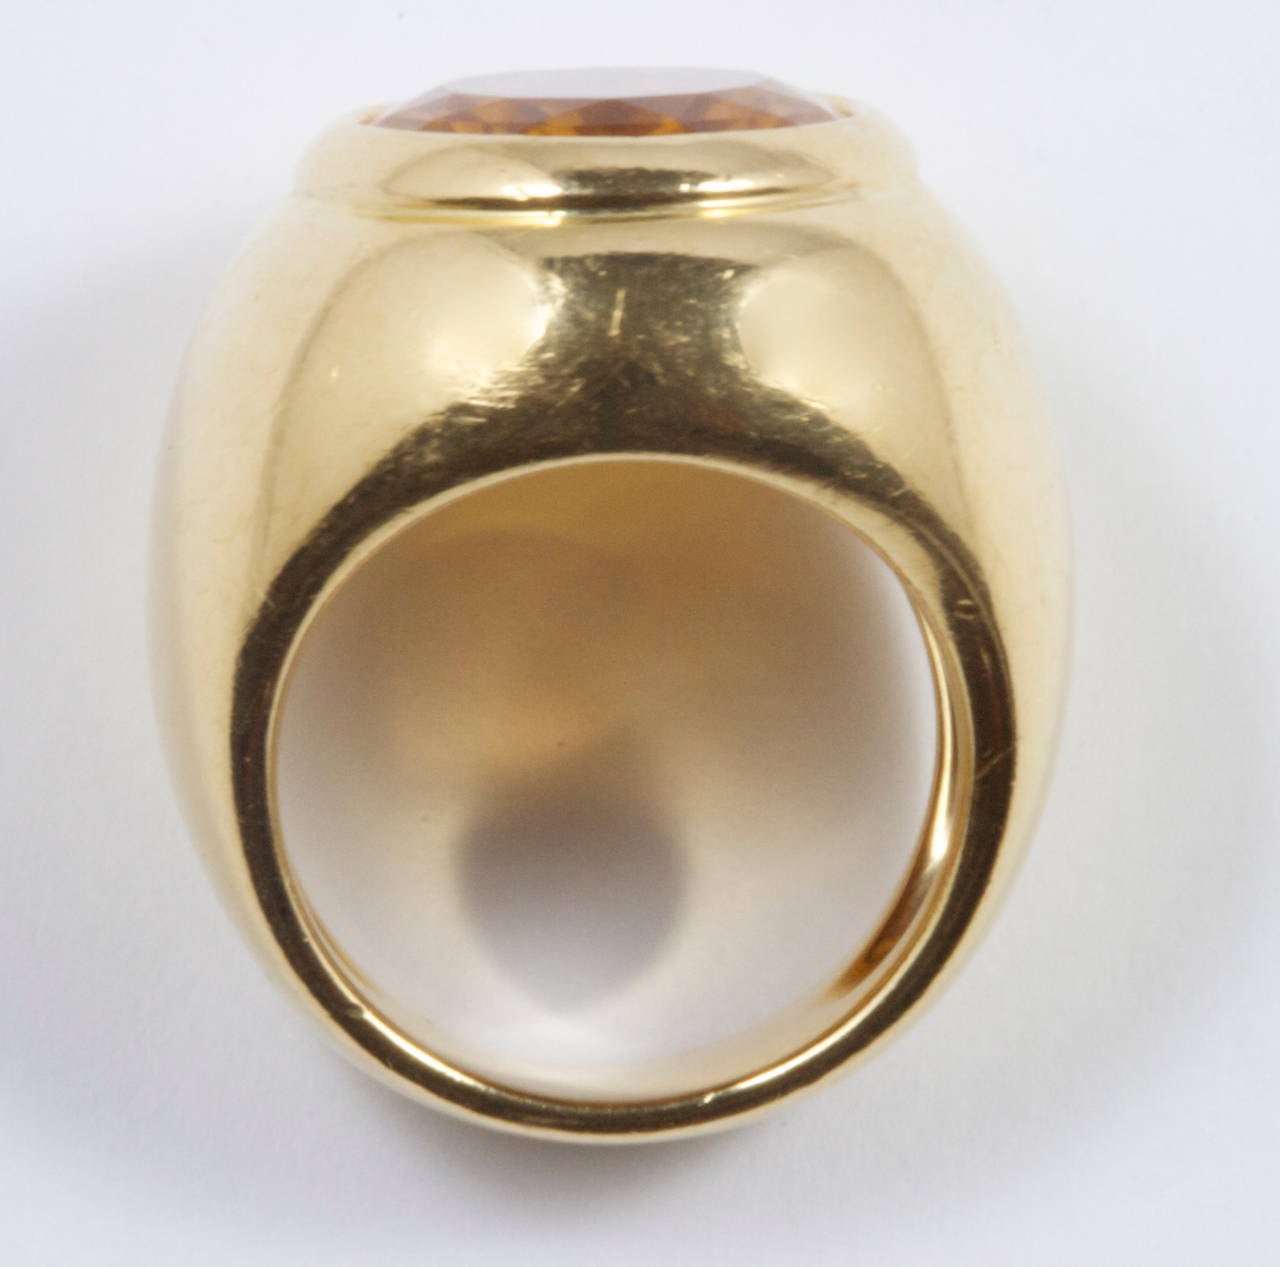 A big, sleek design from the jewelry house of Cartier. Fashioned with a lively orange citrine that easily transitions into the 18k yellow gold that embraces the gemstone. Signed Cartier, numbered and stamped 1997.

Ring size 51 or 5-3/4